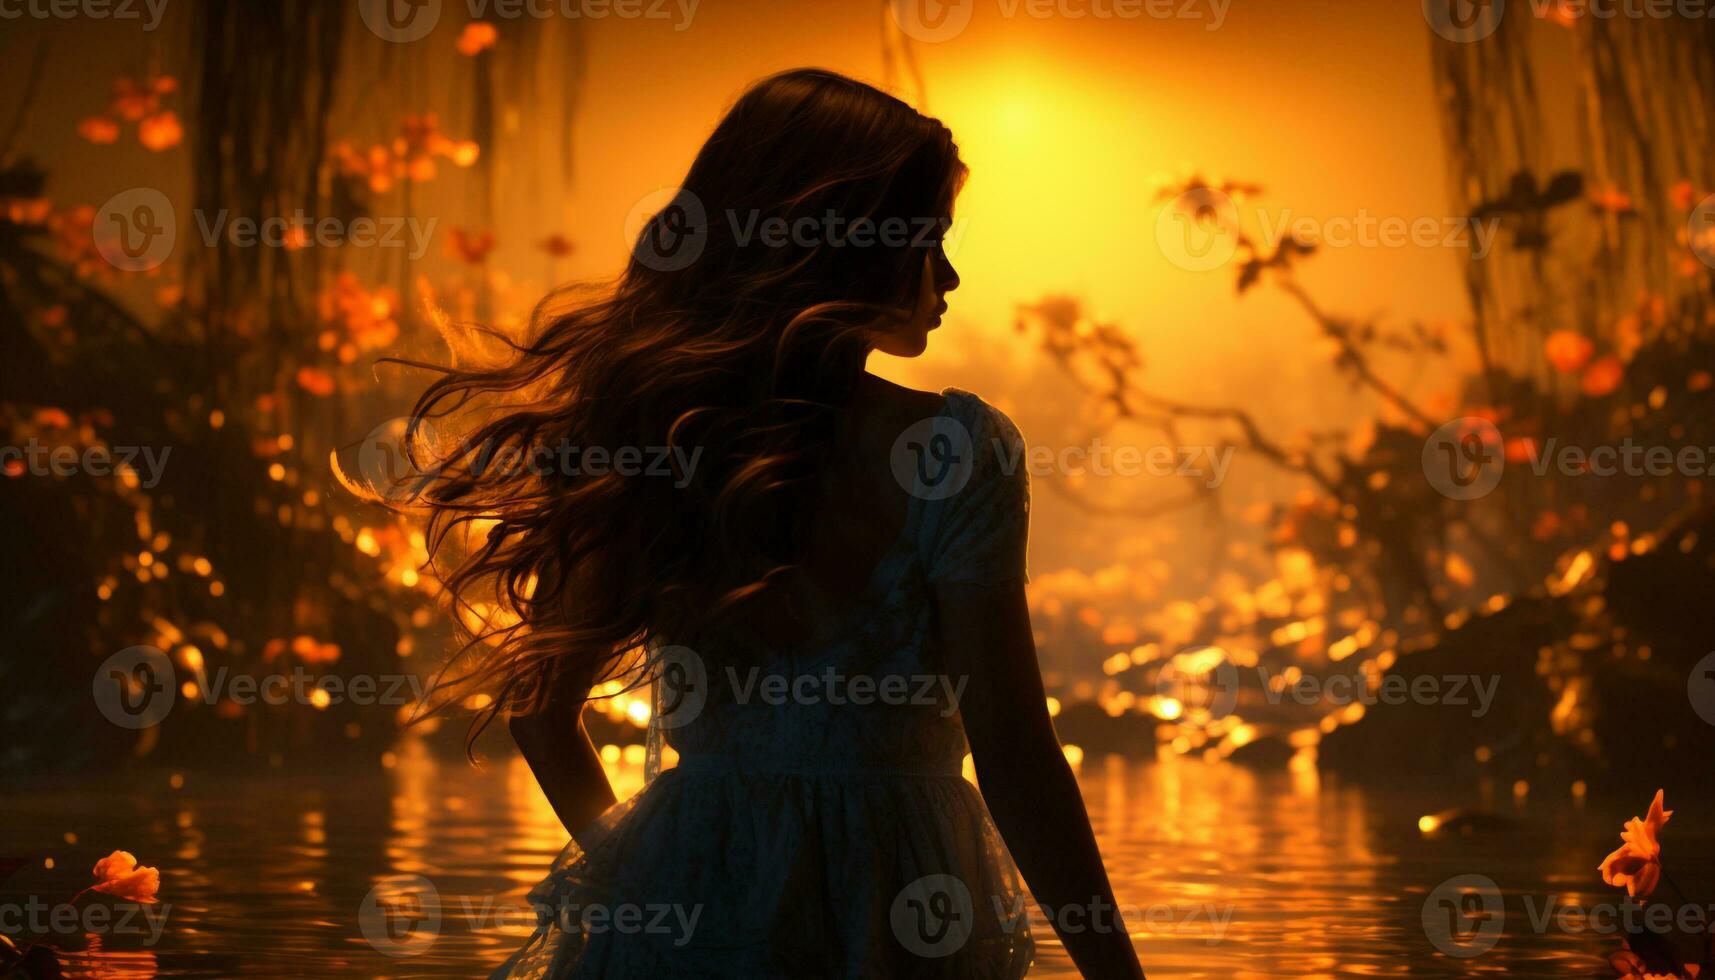 Young woman enjoys nature beauty, smiling at sunset by the water generated by AI photo